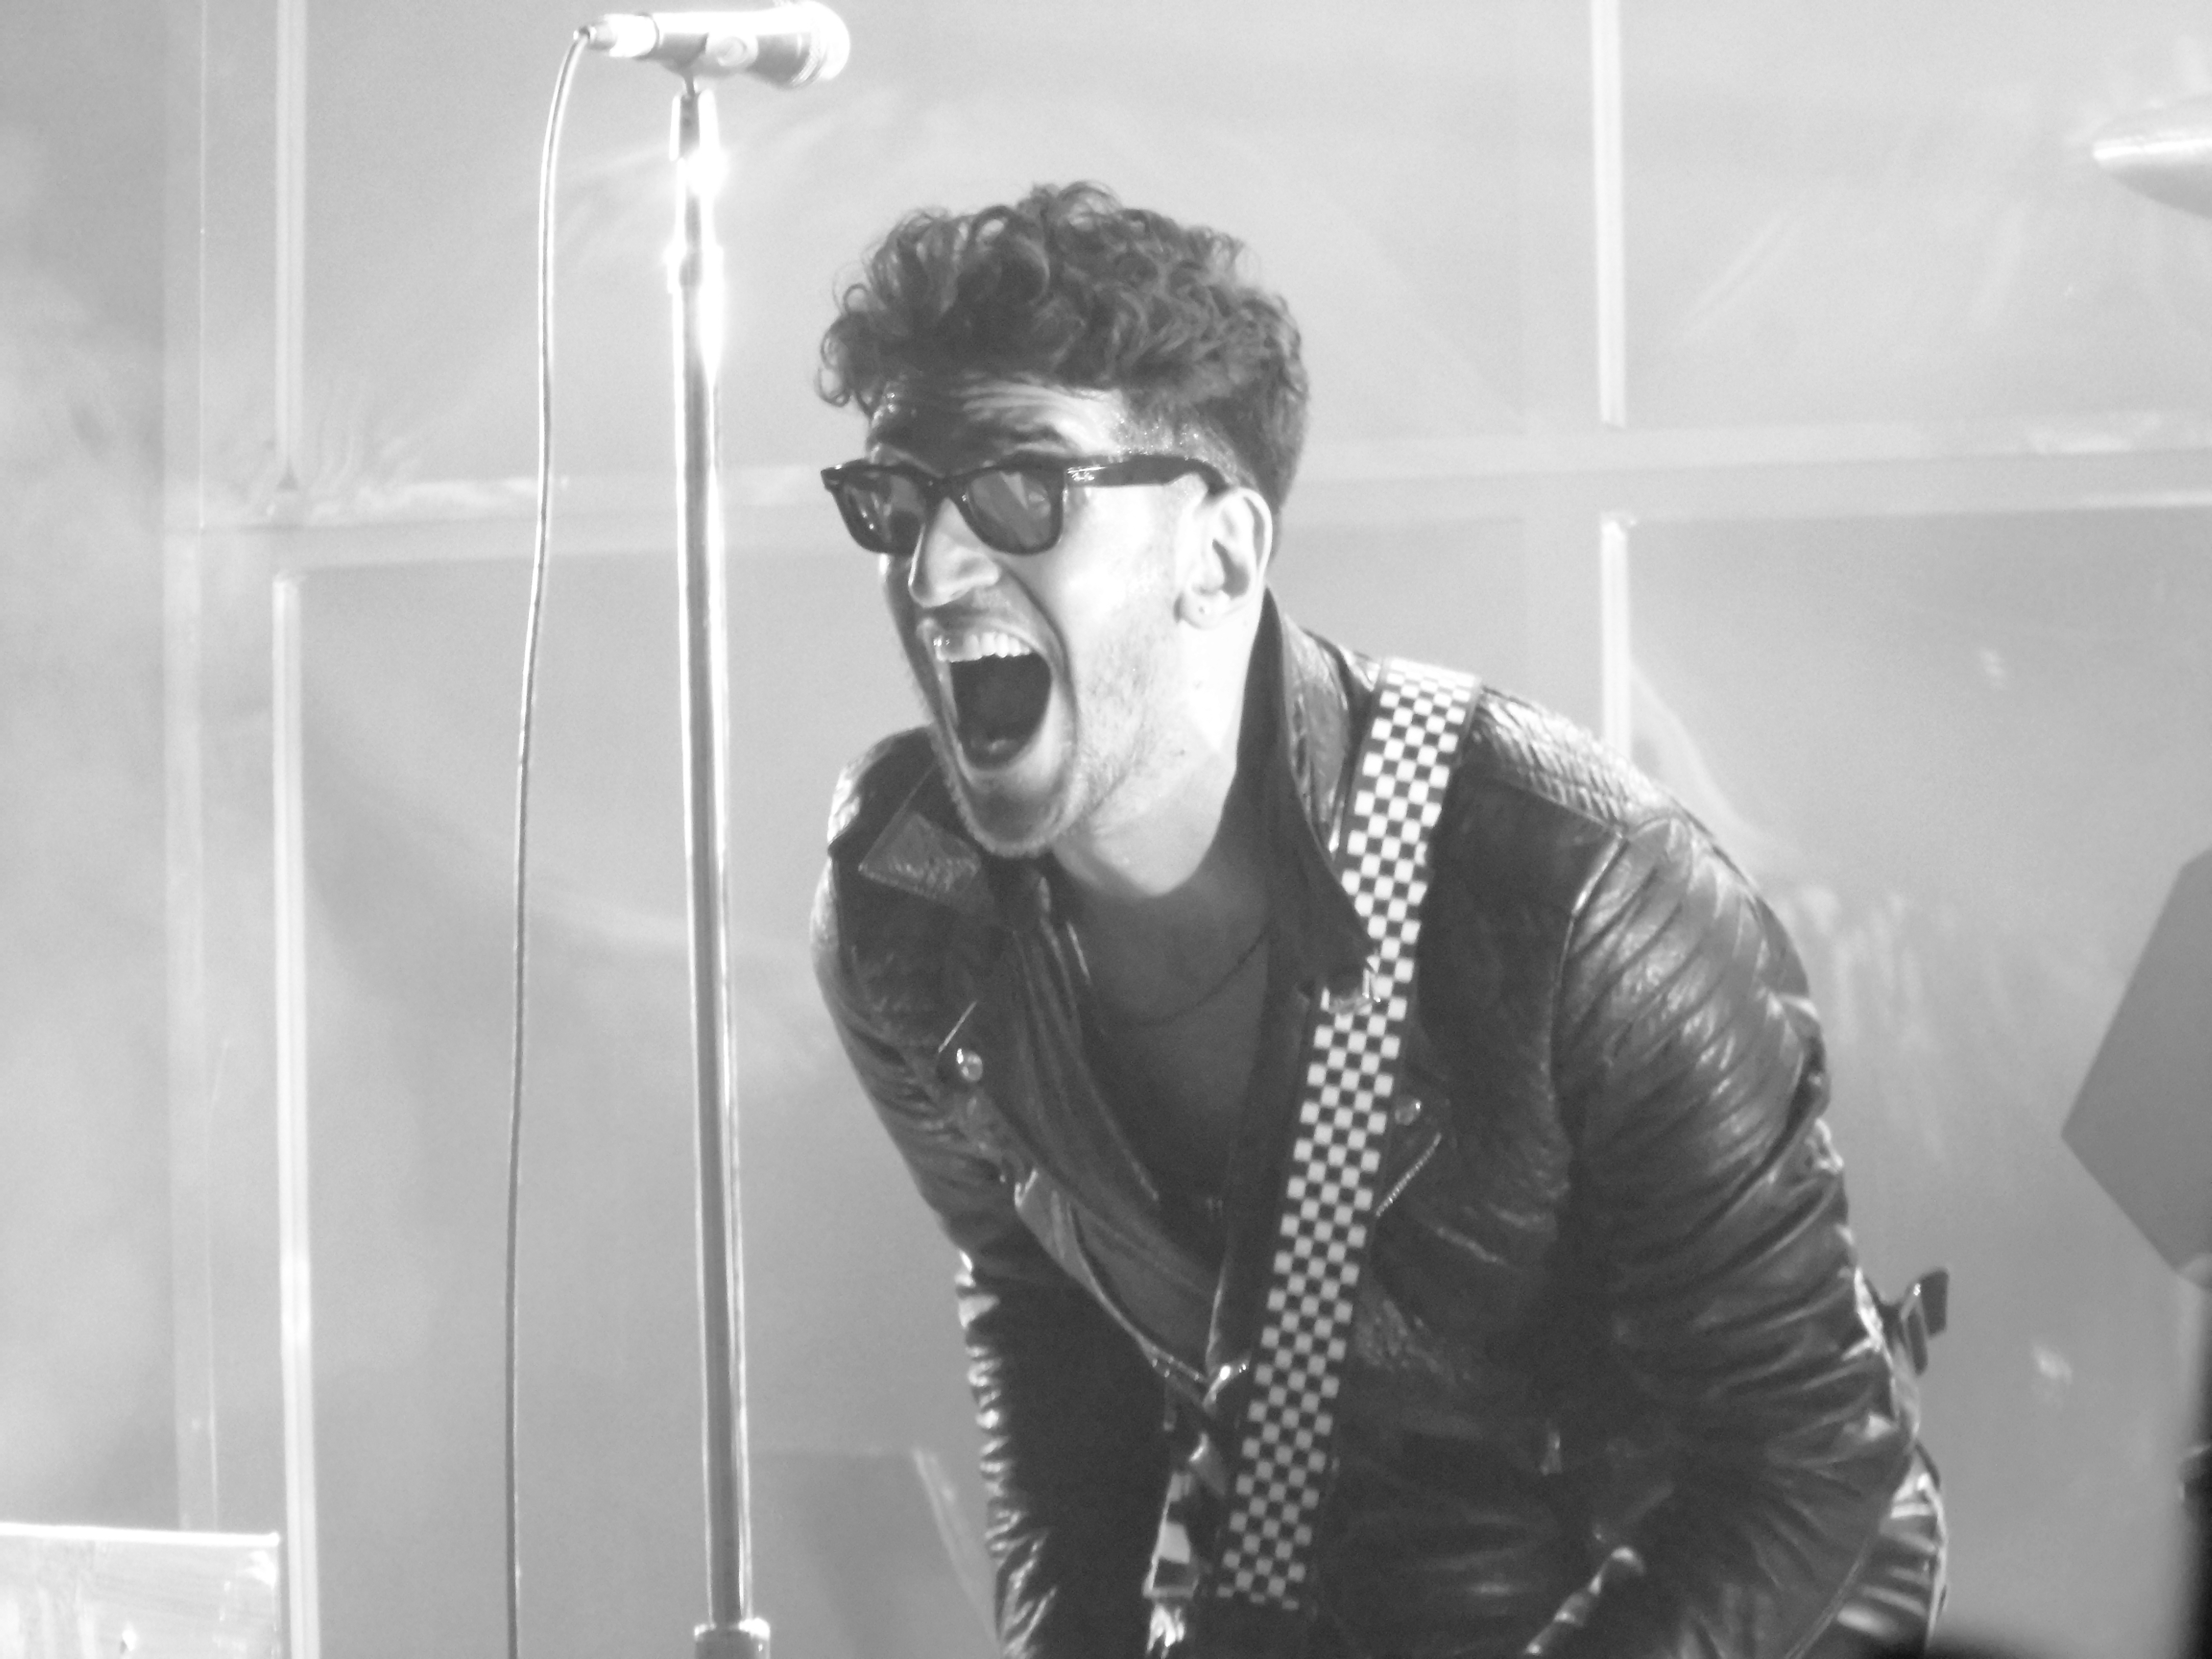 Show Review and Photo Gallery: Chromeo Live in Boston